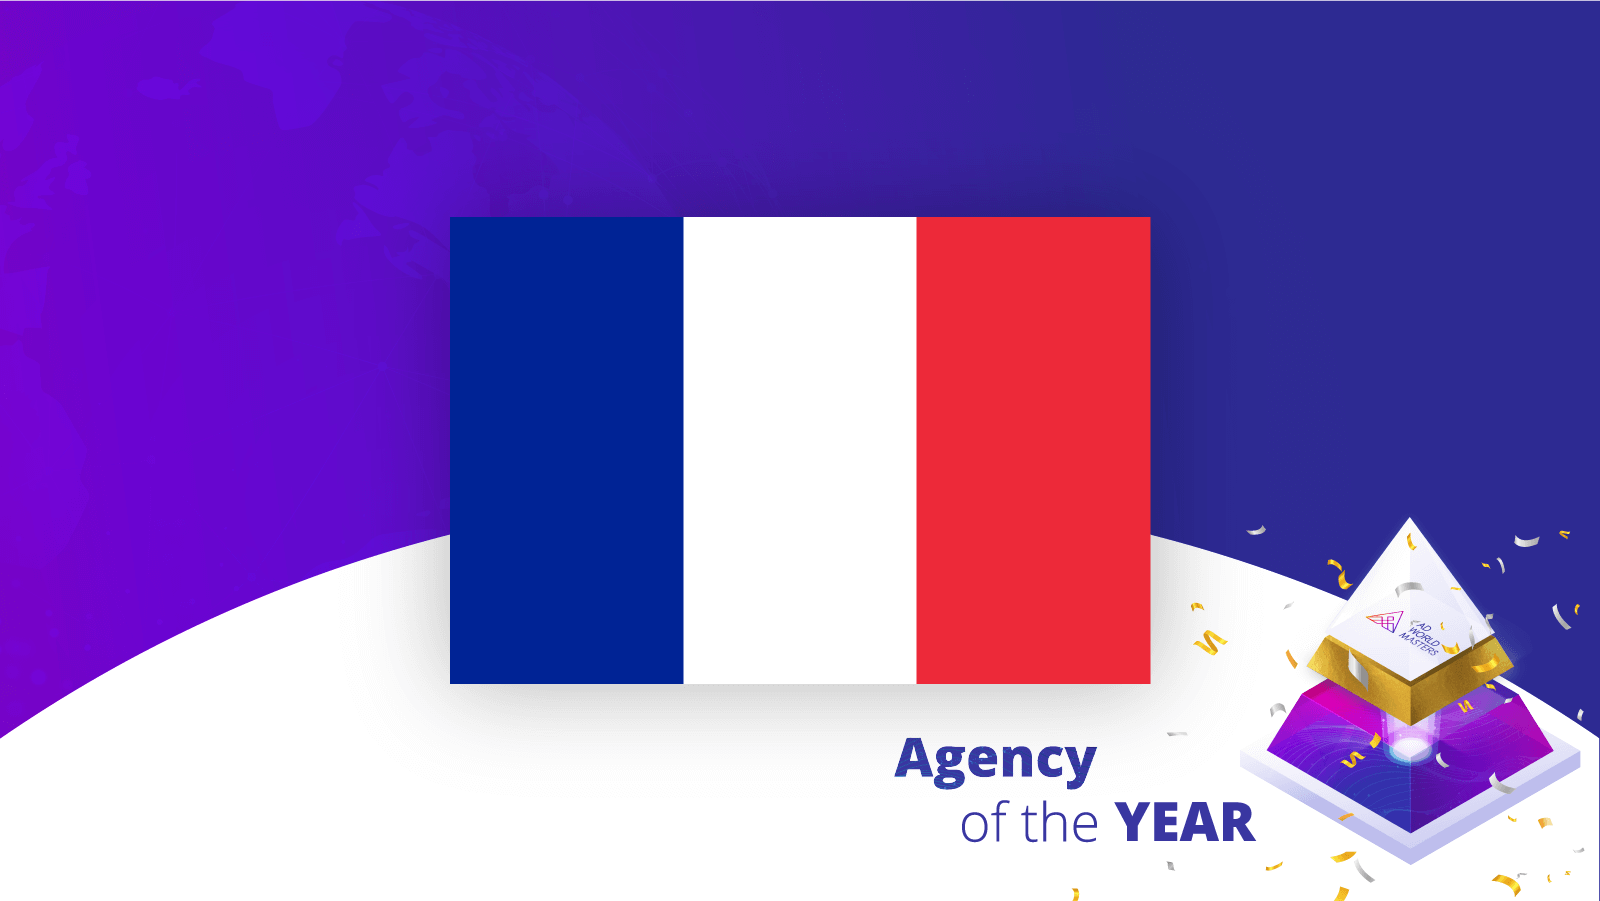 Agencies of the Year France